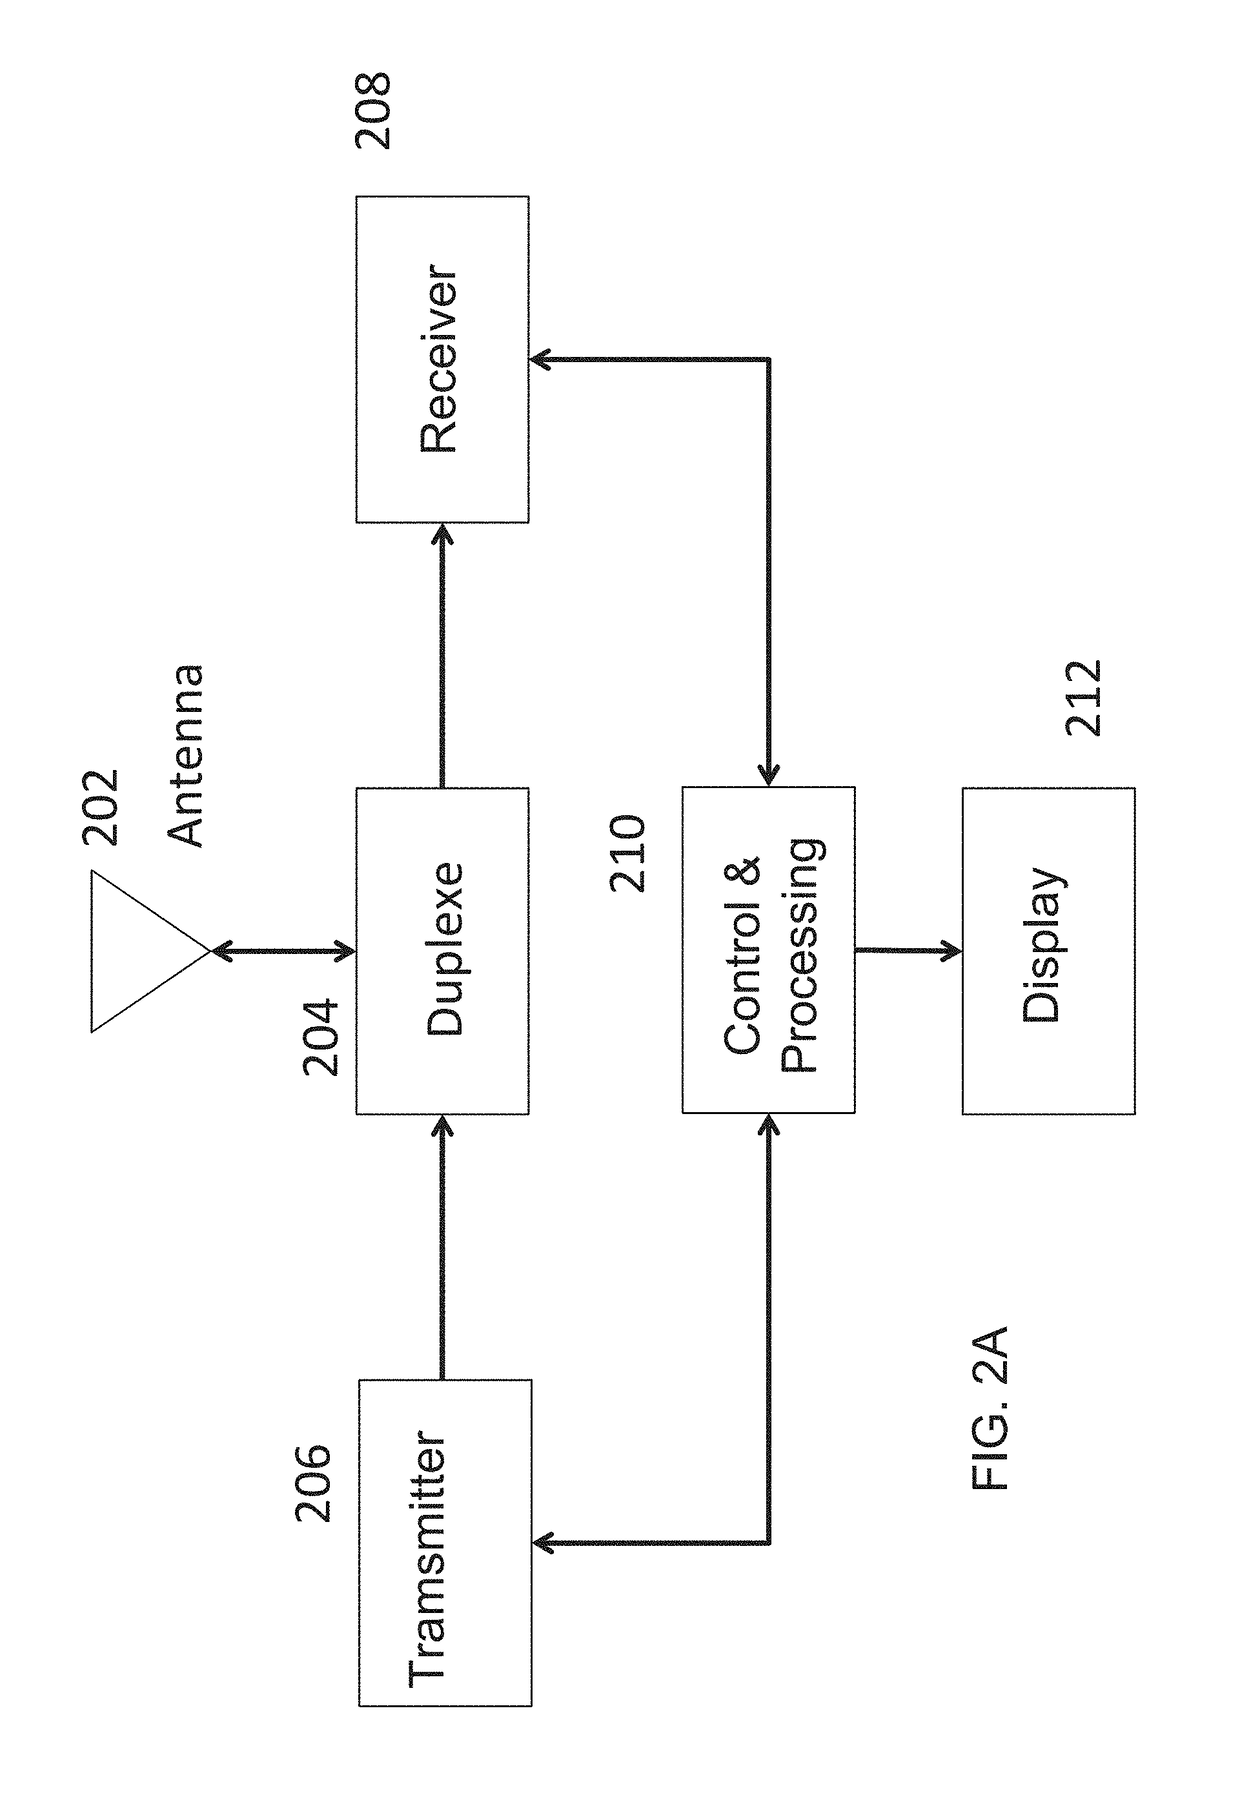 Increasing performance of a receive pipeline of a radar with memory optimization